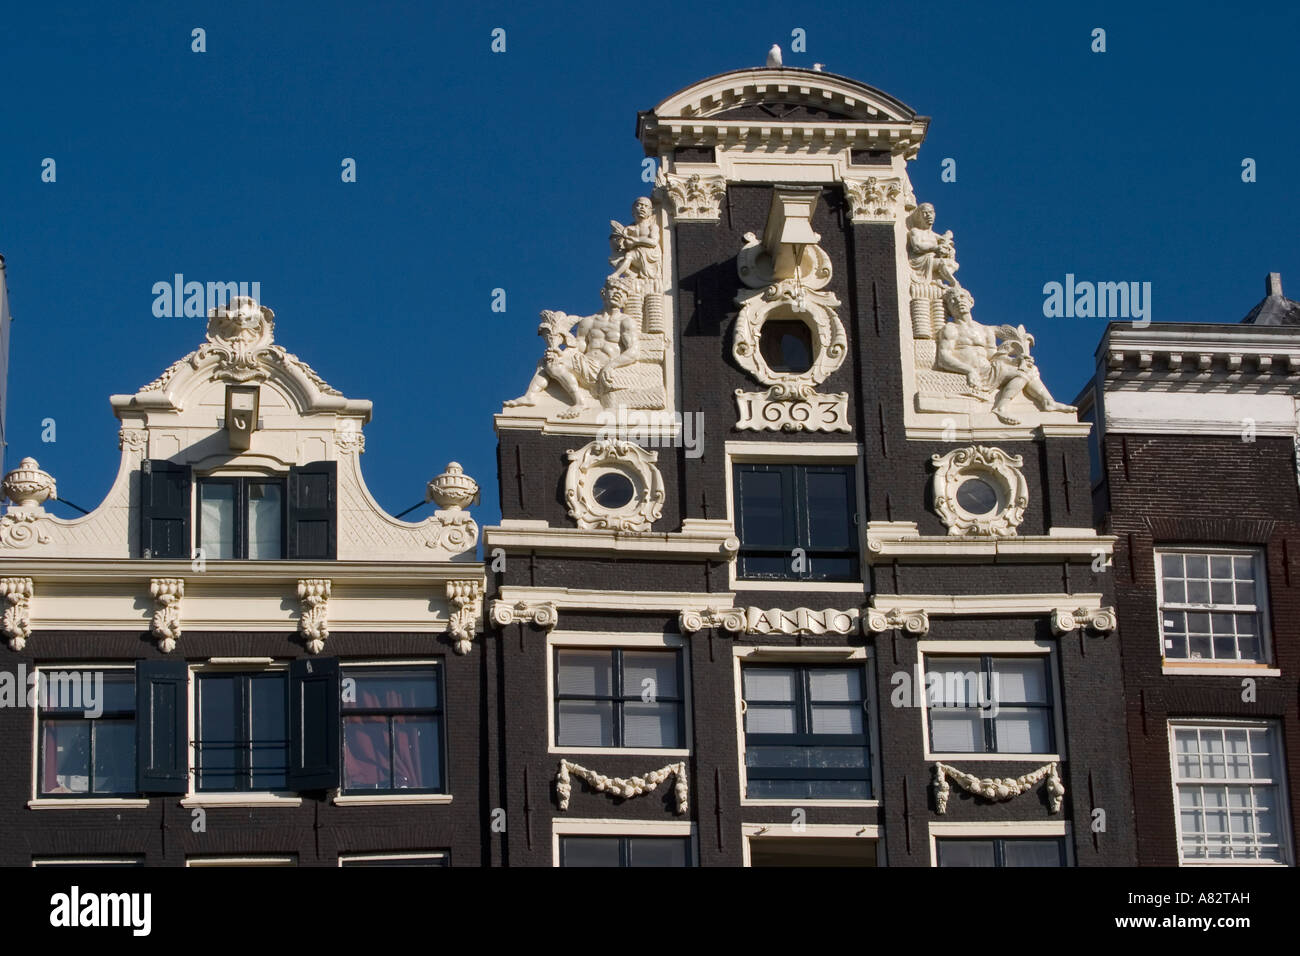 Amsterdam Jourdan district typical architecture canal house pediment with lifting block Stock Photo